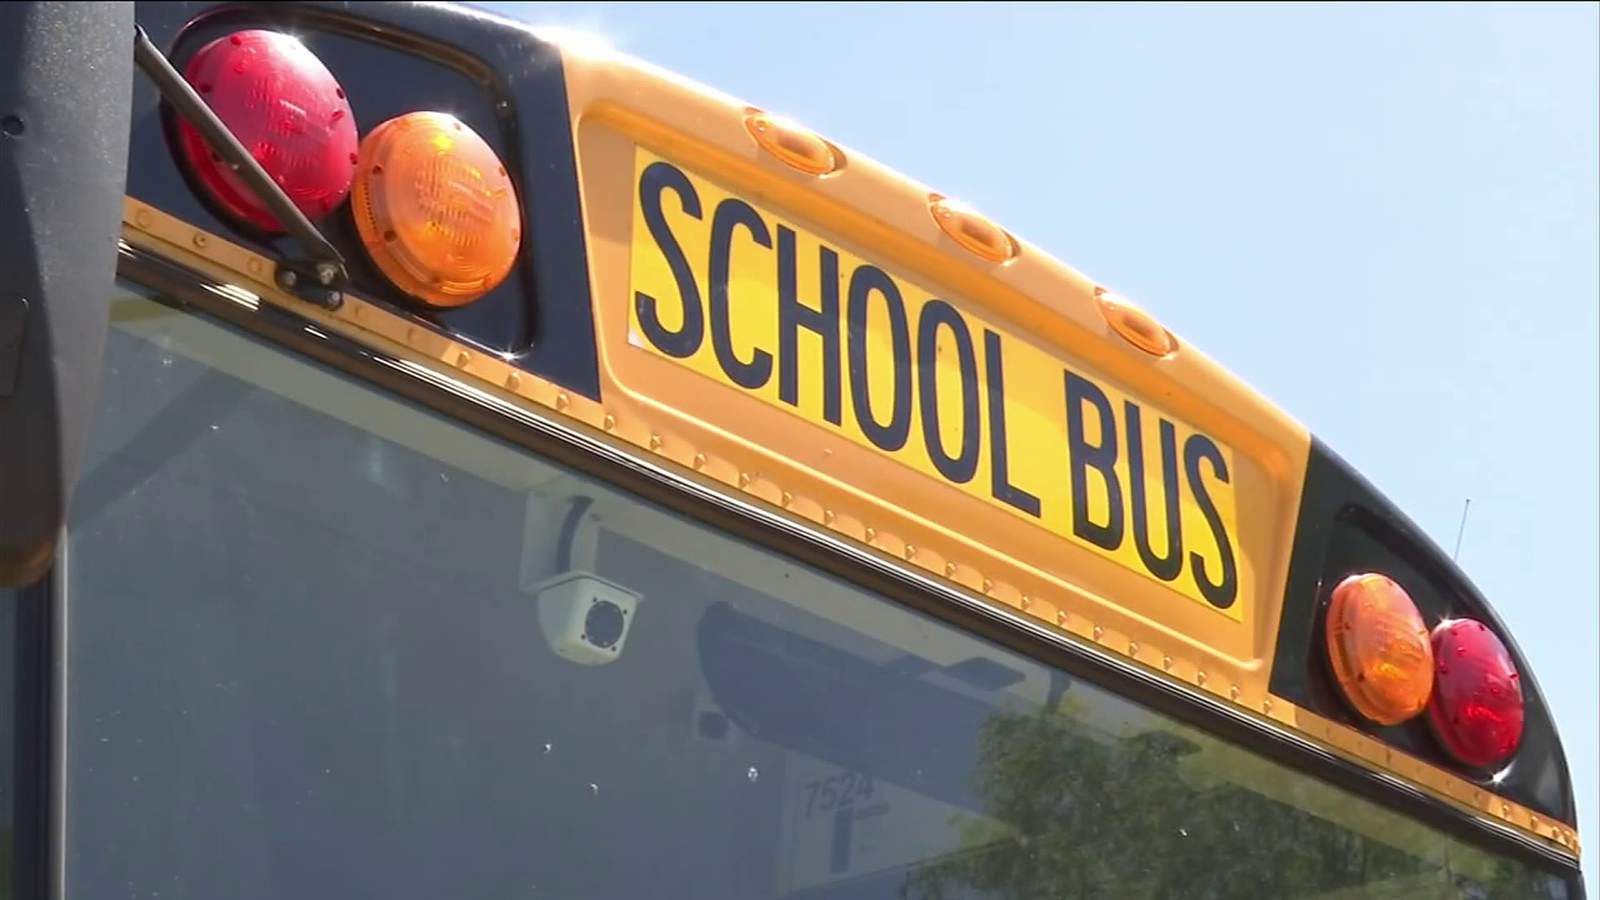 Its not worth my life: Some teachers, bus drivers leaving jobs over COVID-19 concerns